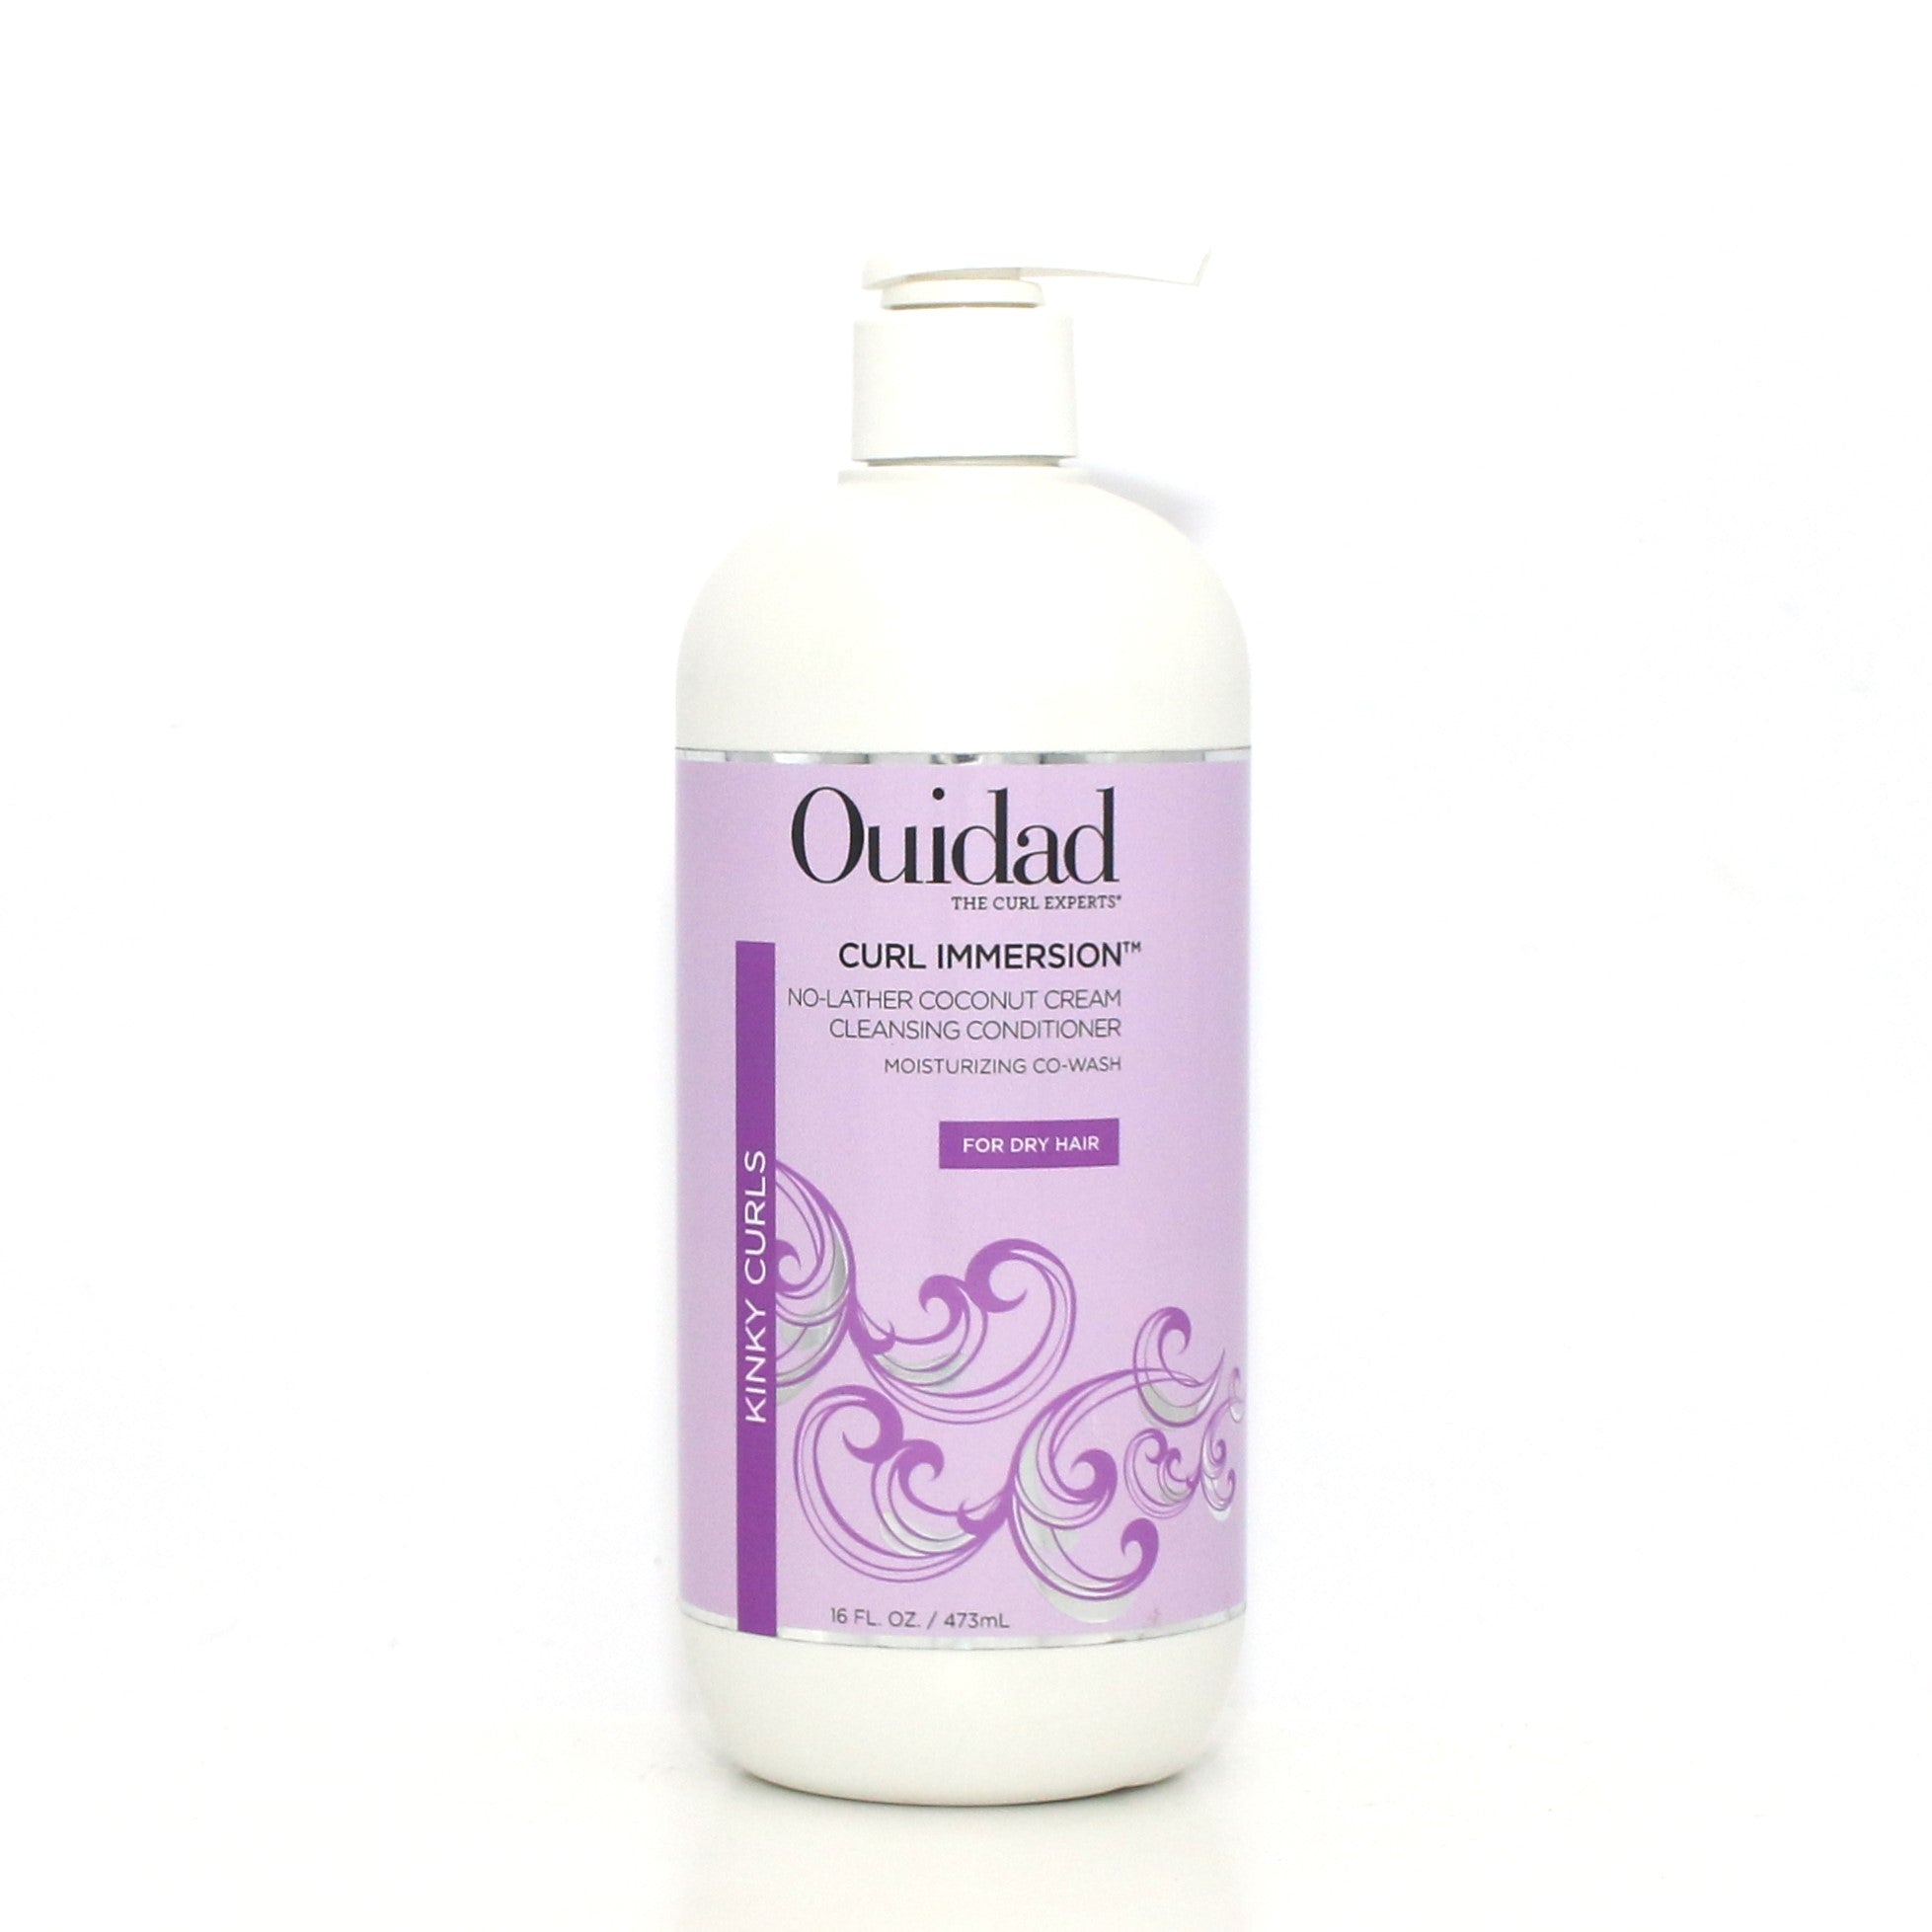 OUIDAD Curl Immersion No Lather Coconut Cream Cleansing Conditioner 16 oz